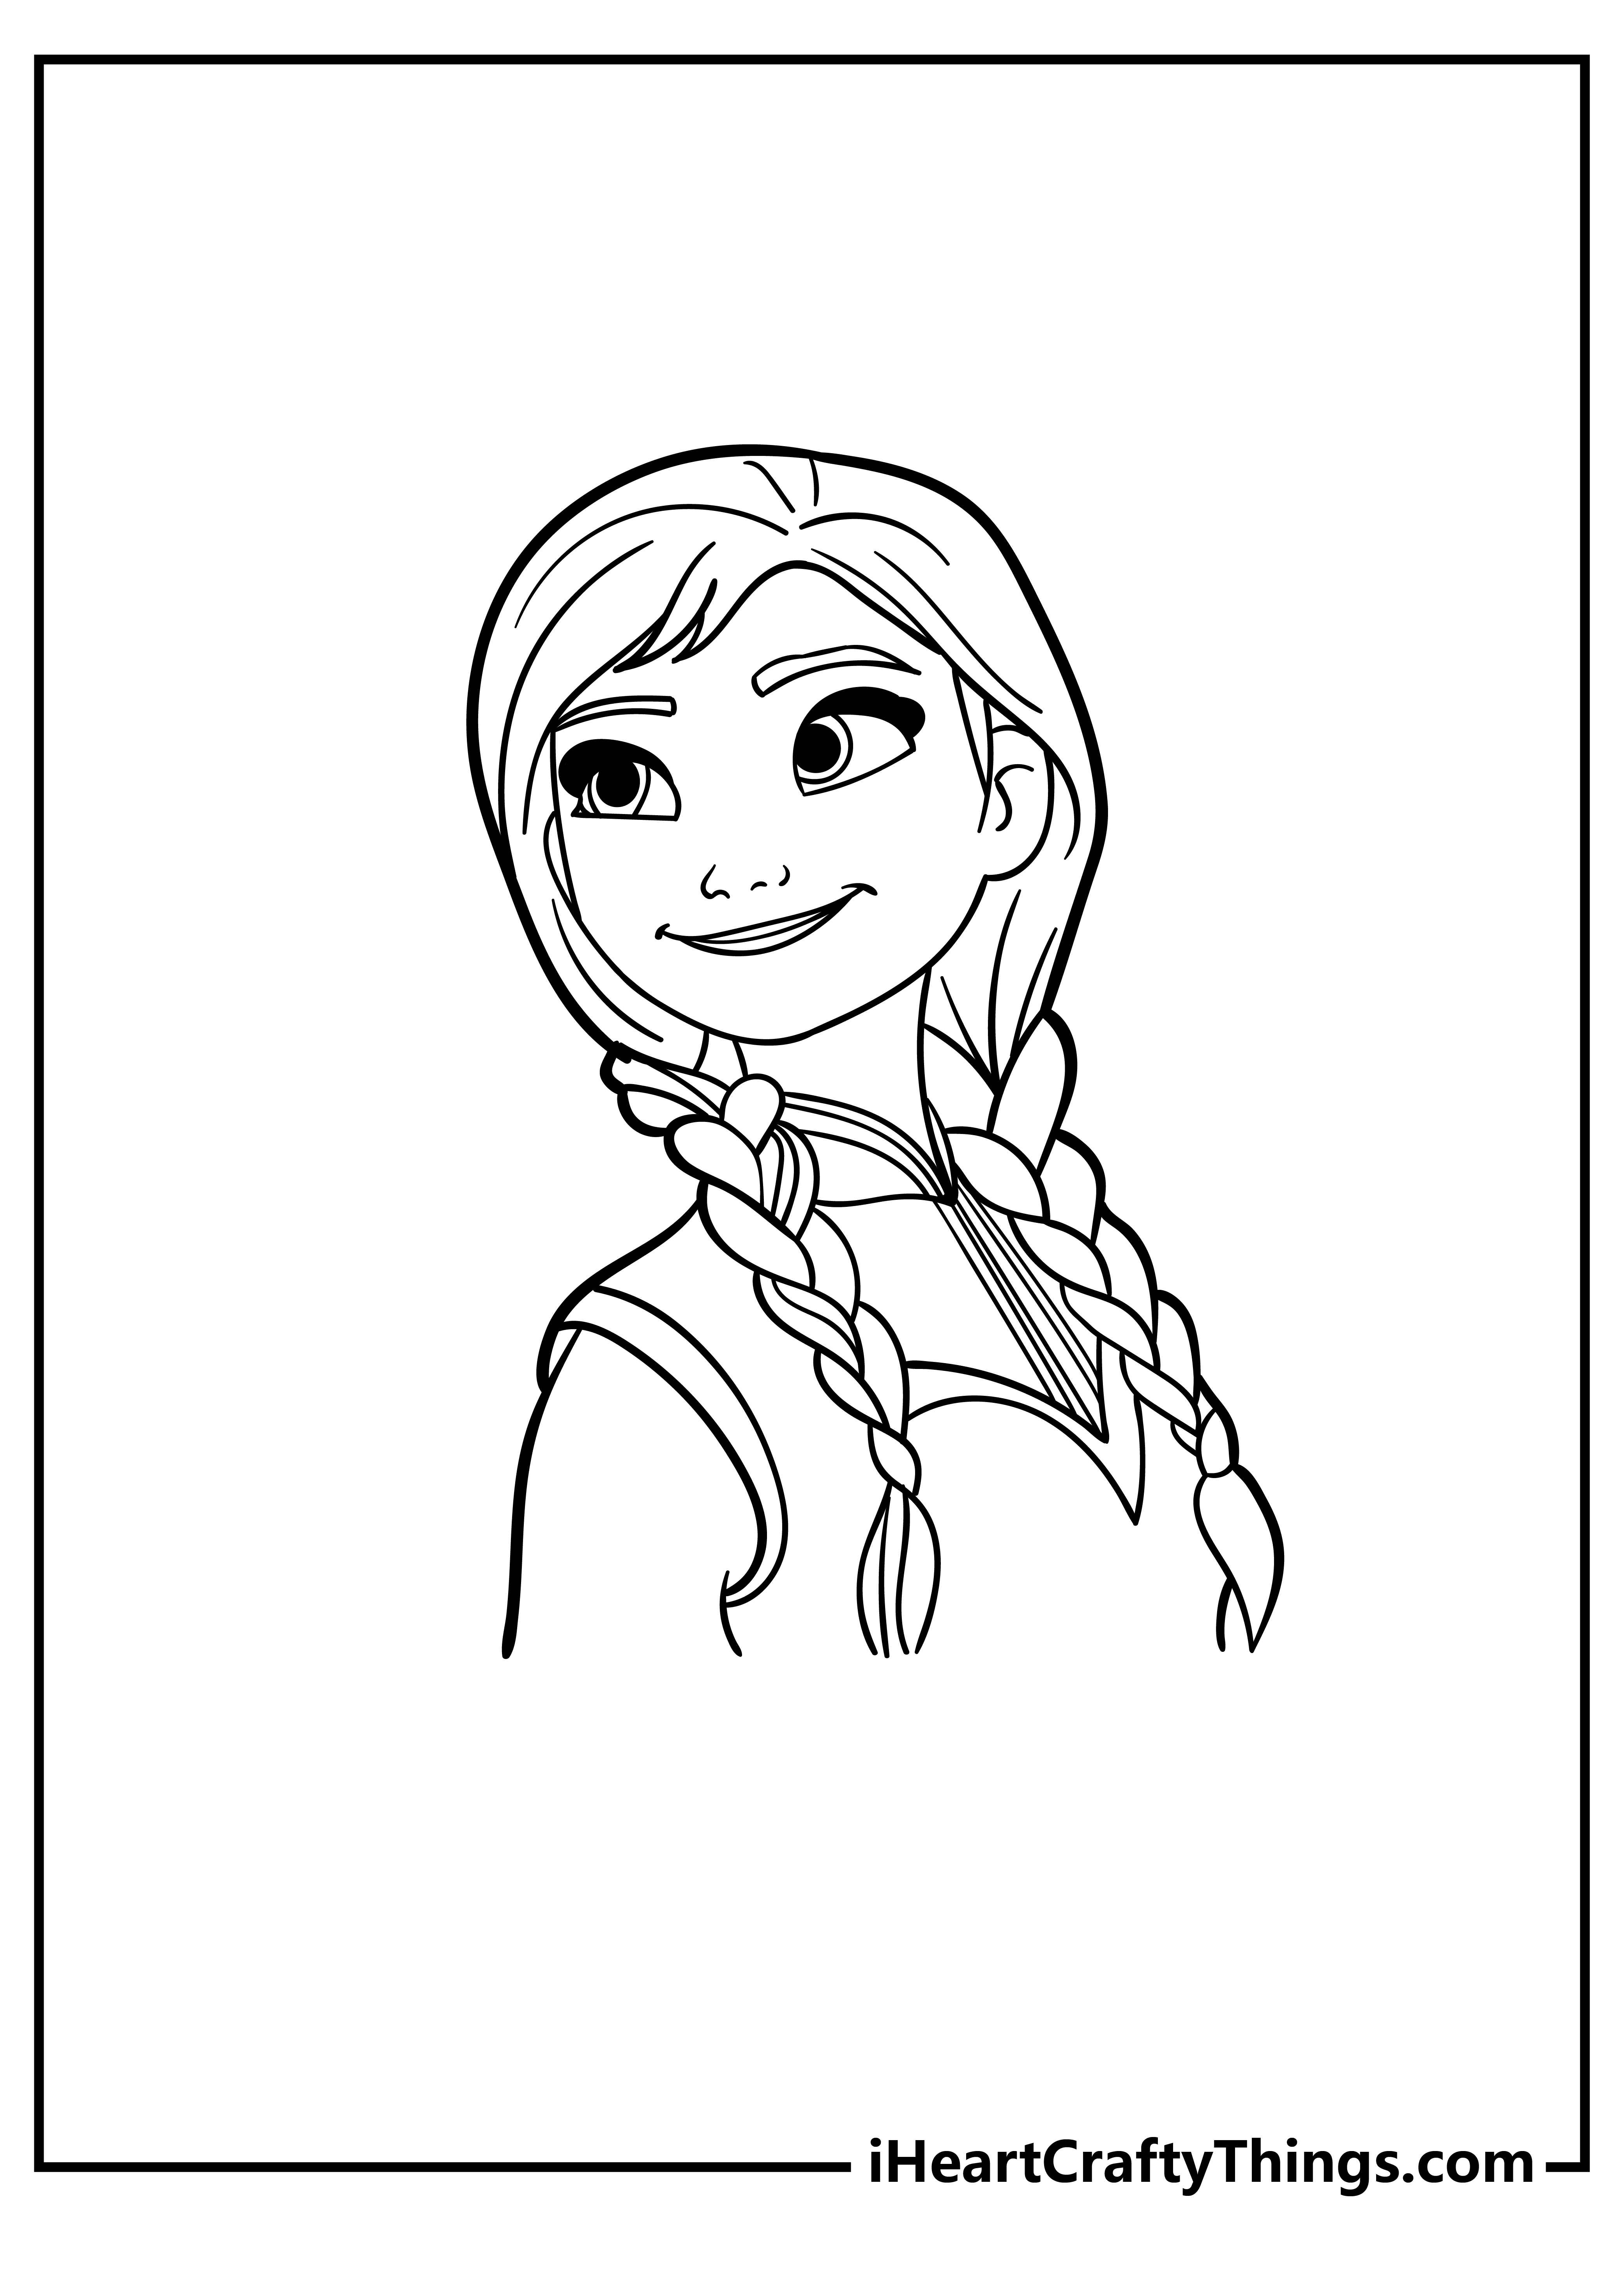 Elsa and Anna Coloring Pages free pdf download